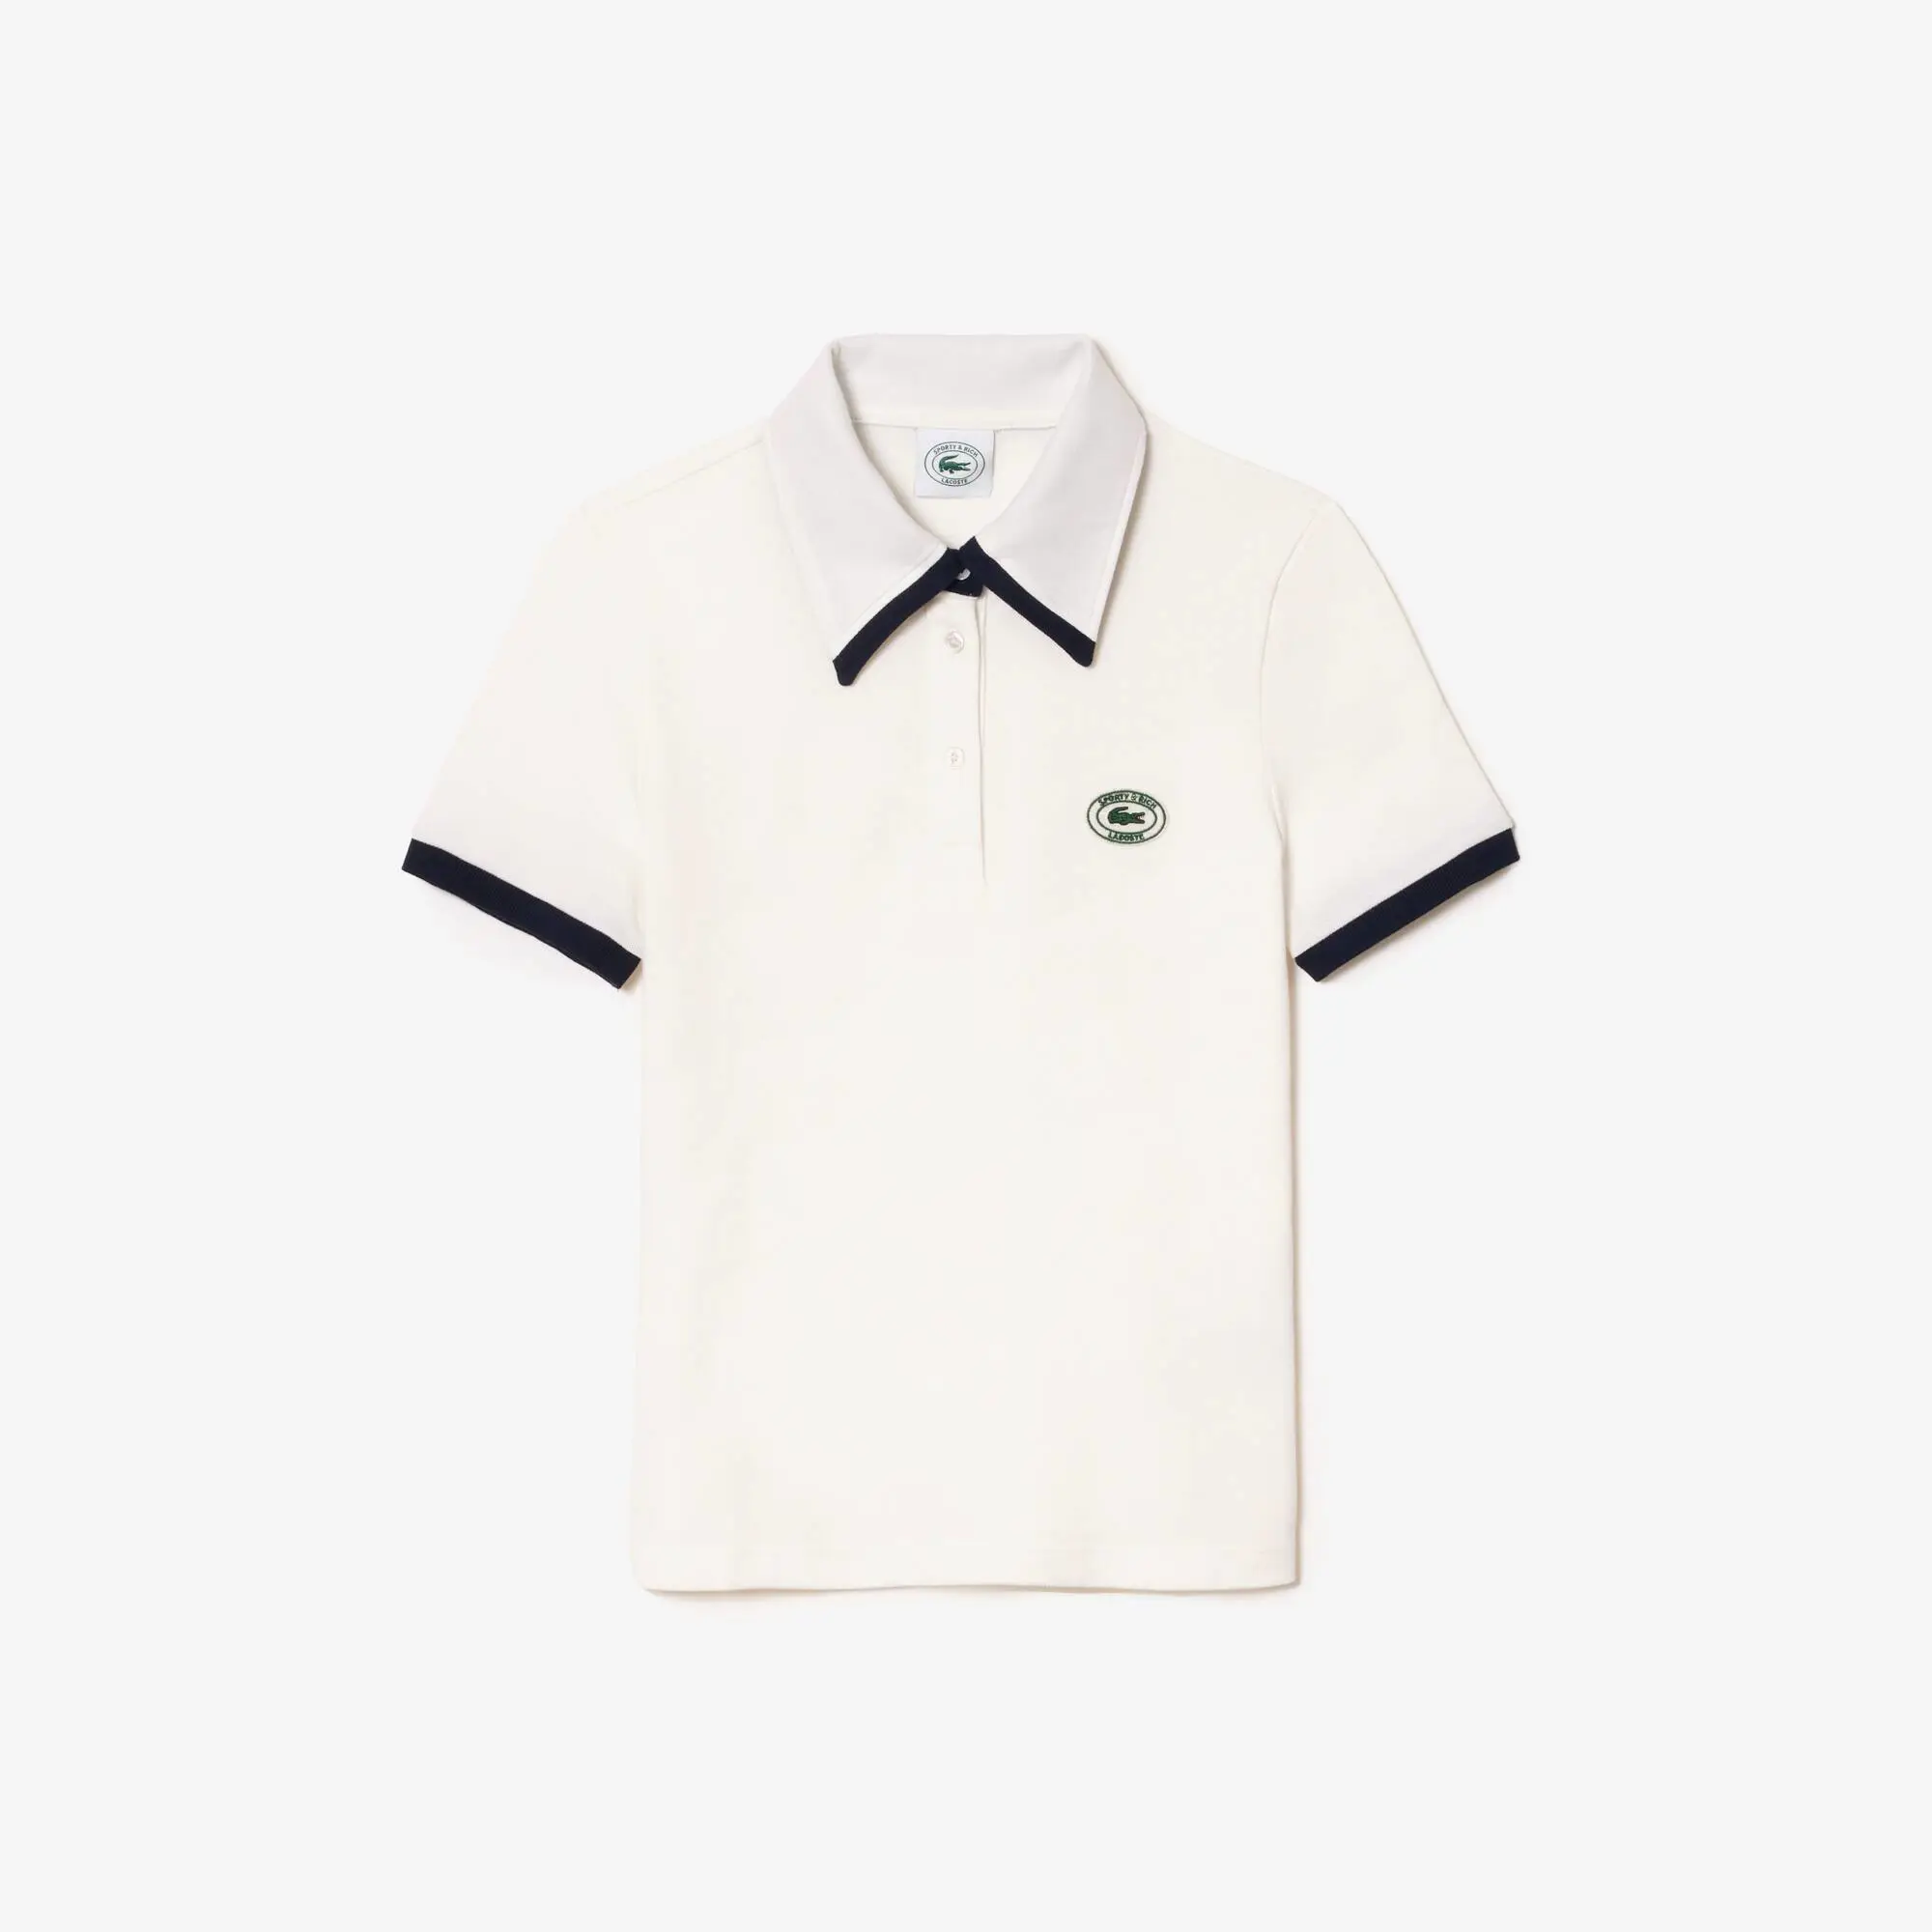 Lacoste x Sporty & Rich Contrast Collar Polo Shirt. 2